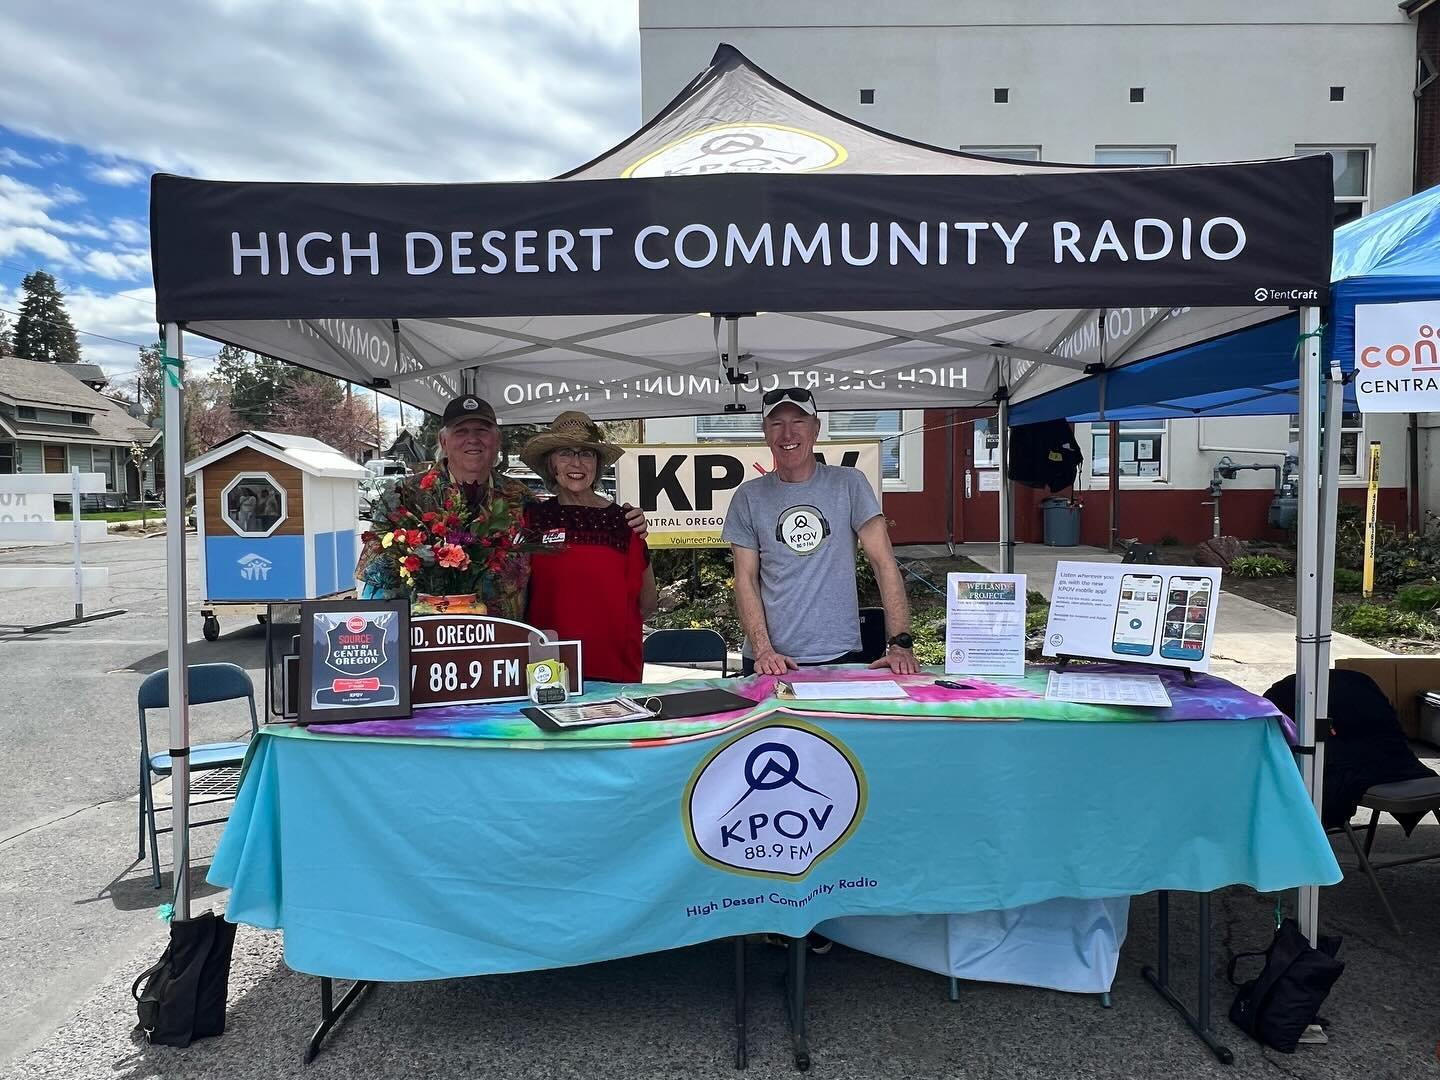 A big thank you to @envirocenterbend for having us out at the Earth Day Fair this weekend! We had a great time meeting the community, sharing what we do, and enjoying this amazing event on a beautiful day. Thanks to everyone who stopped by and said h